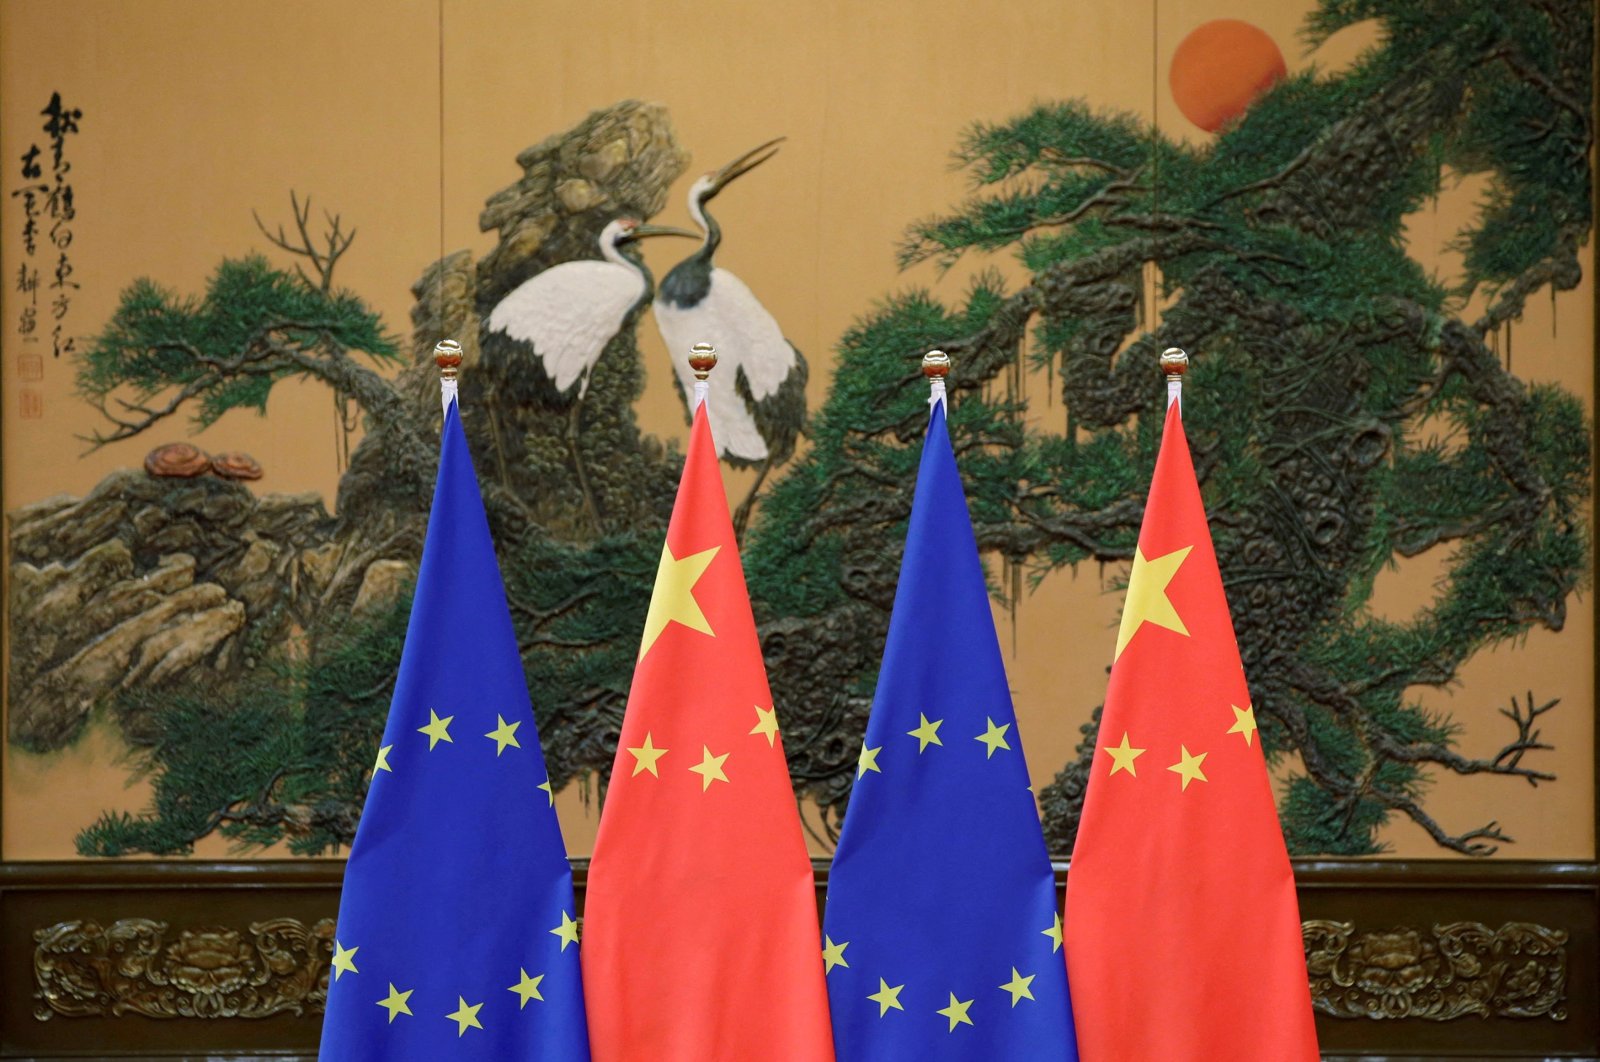 The flags of the European Union and China are pictured during the China-EU summit at the Great Hall of the People, Beijing, China, July 12, 2016. (Reuters Photo)